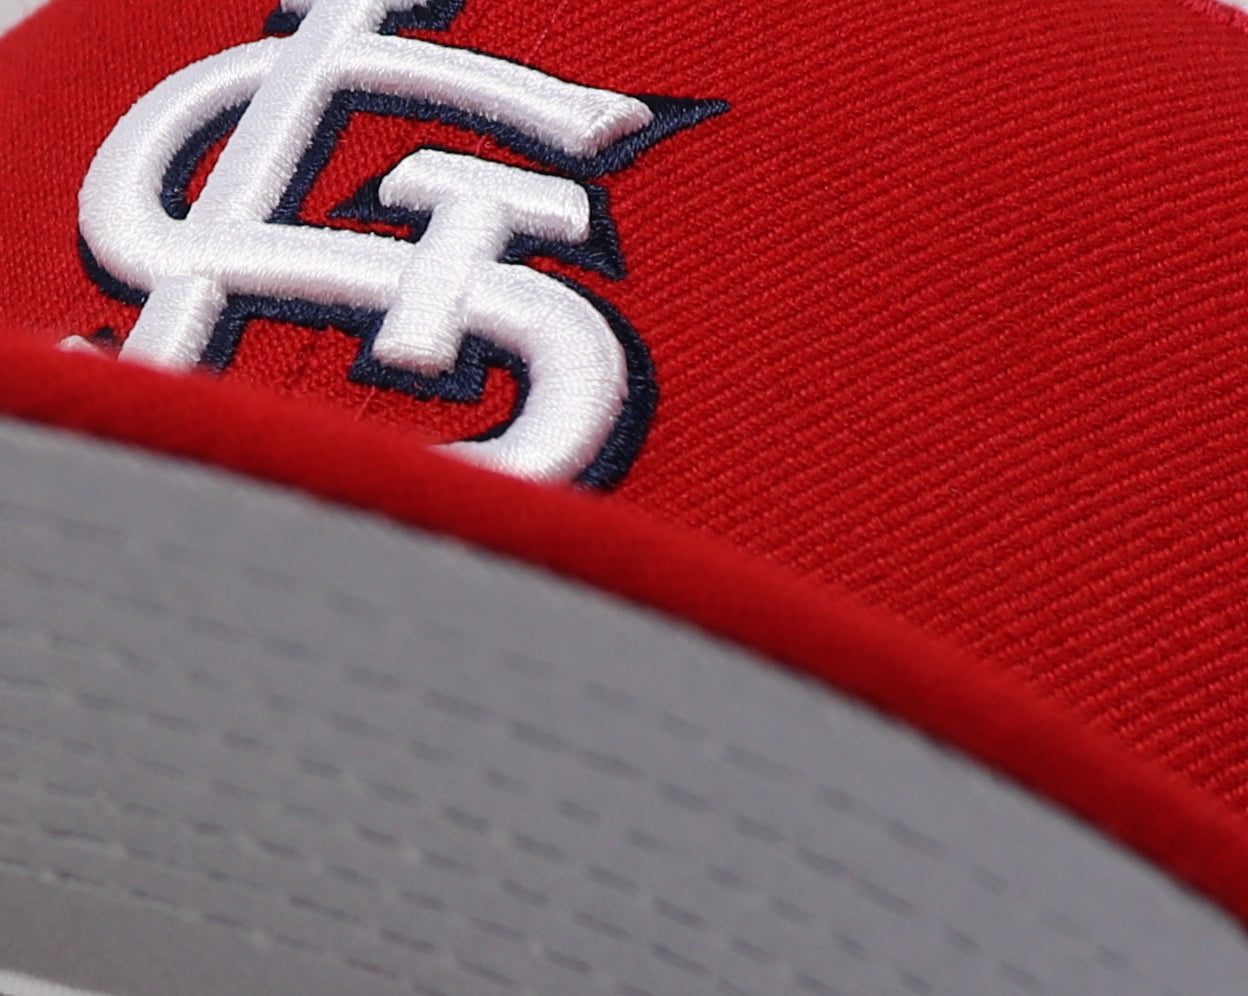 ST. LOUIS CARDINALS (RED) (1999-2006 HOME) NEW ERA 59FIFTY FITTED